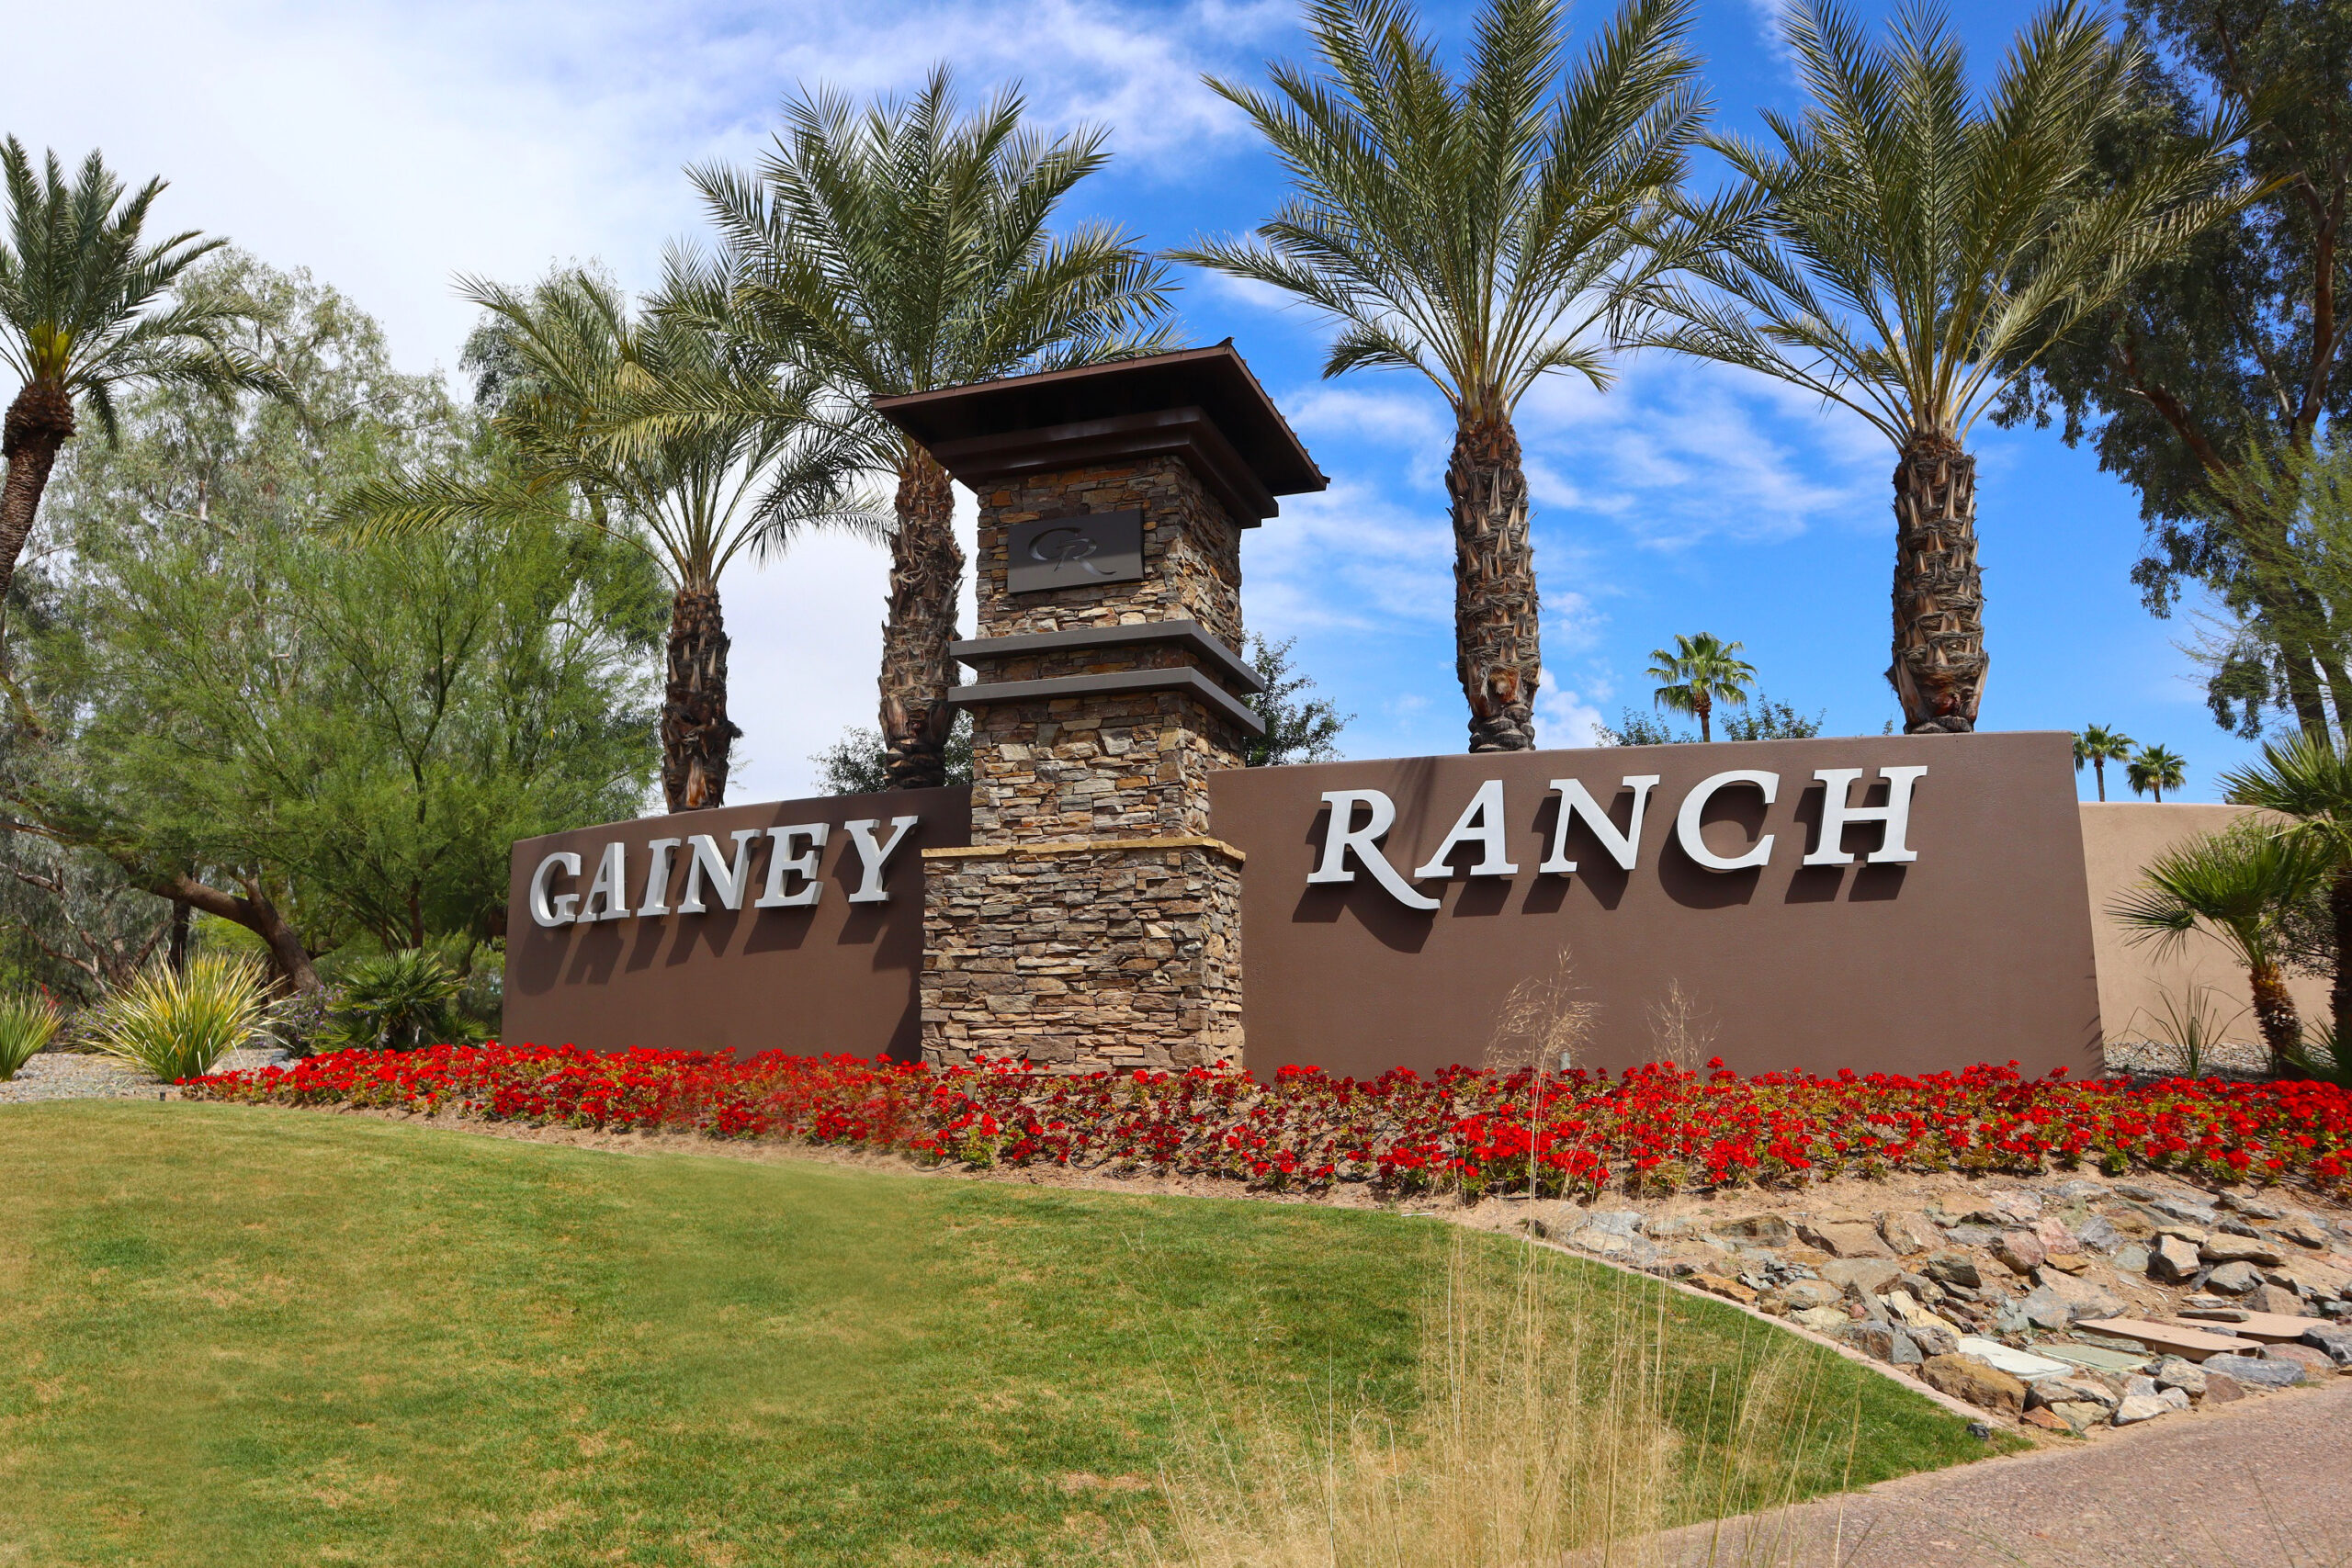 Entrance to Gainey Ranch in Scottsdale, Arizona.